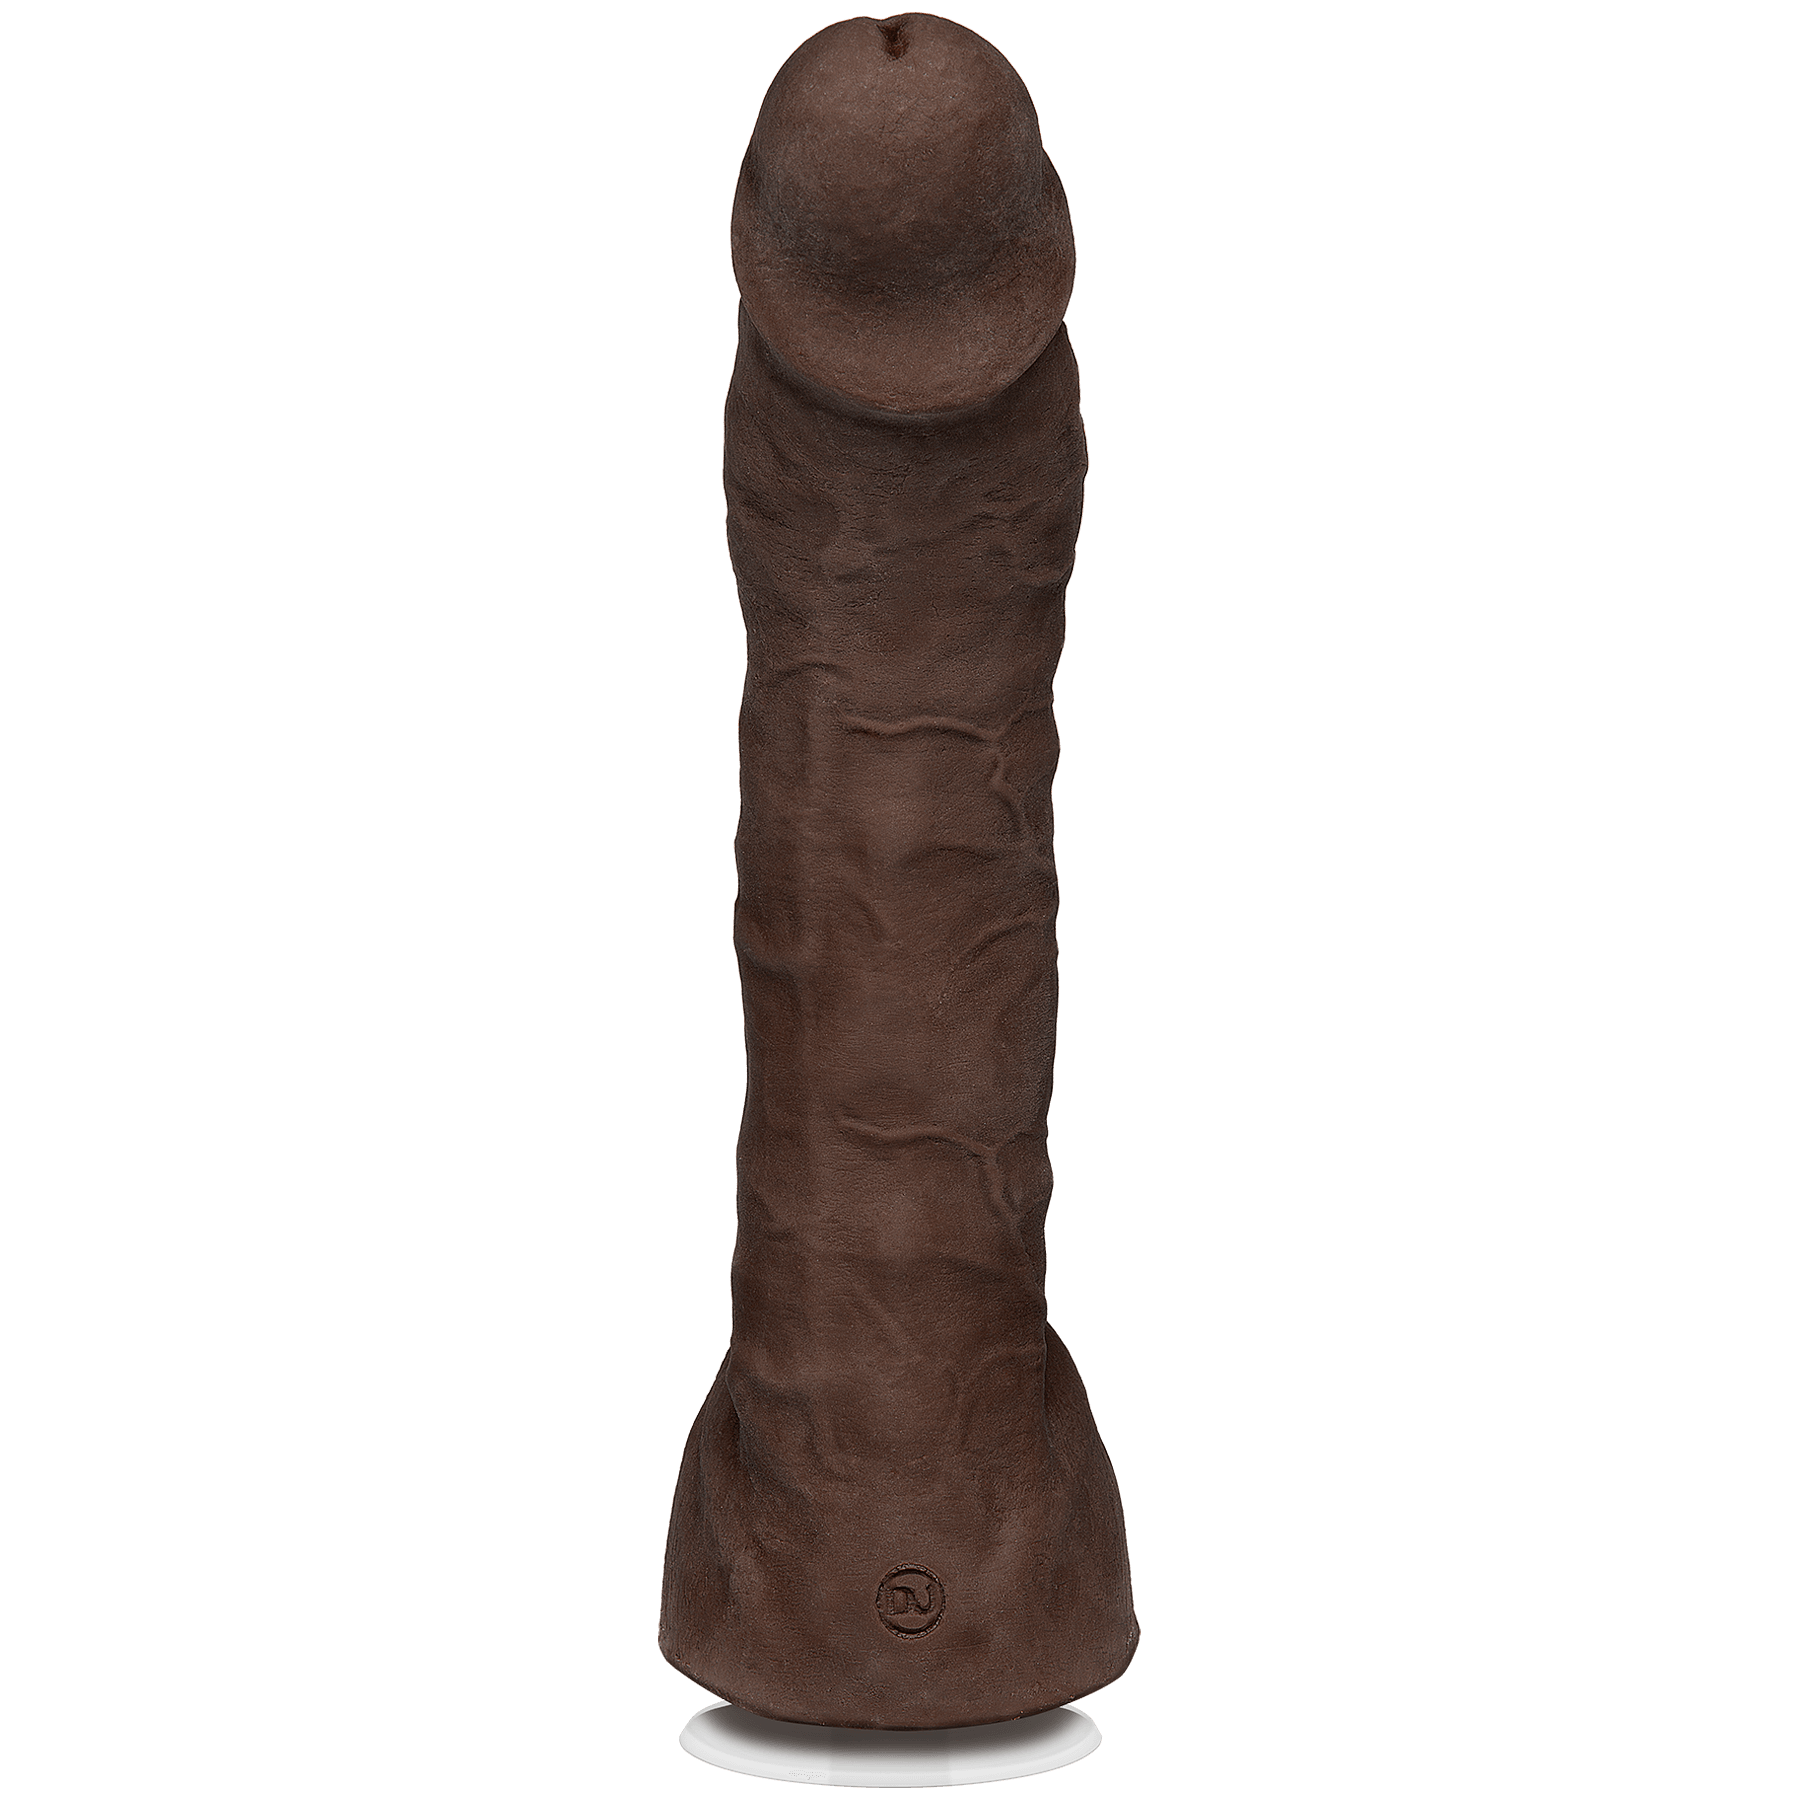 Doc Johnson Signature Cocks Prince Yahshua Dildo 10.5in Cock - Buy At Luxury Toy X - Free 3-Day Shipping